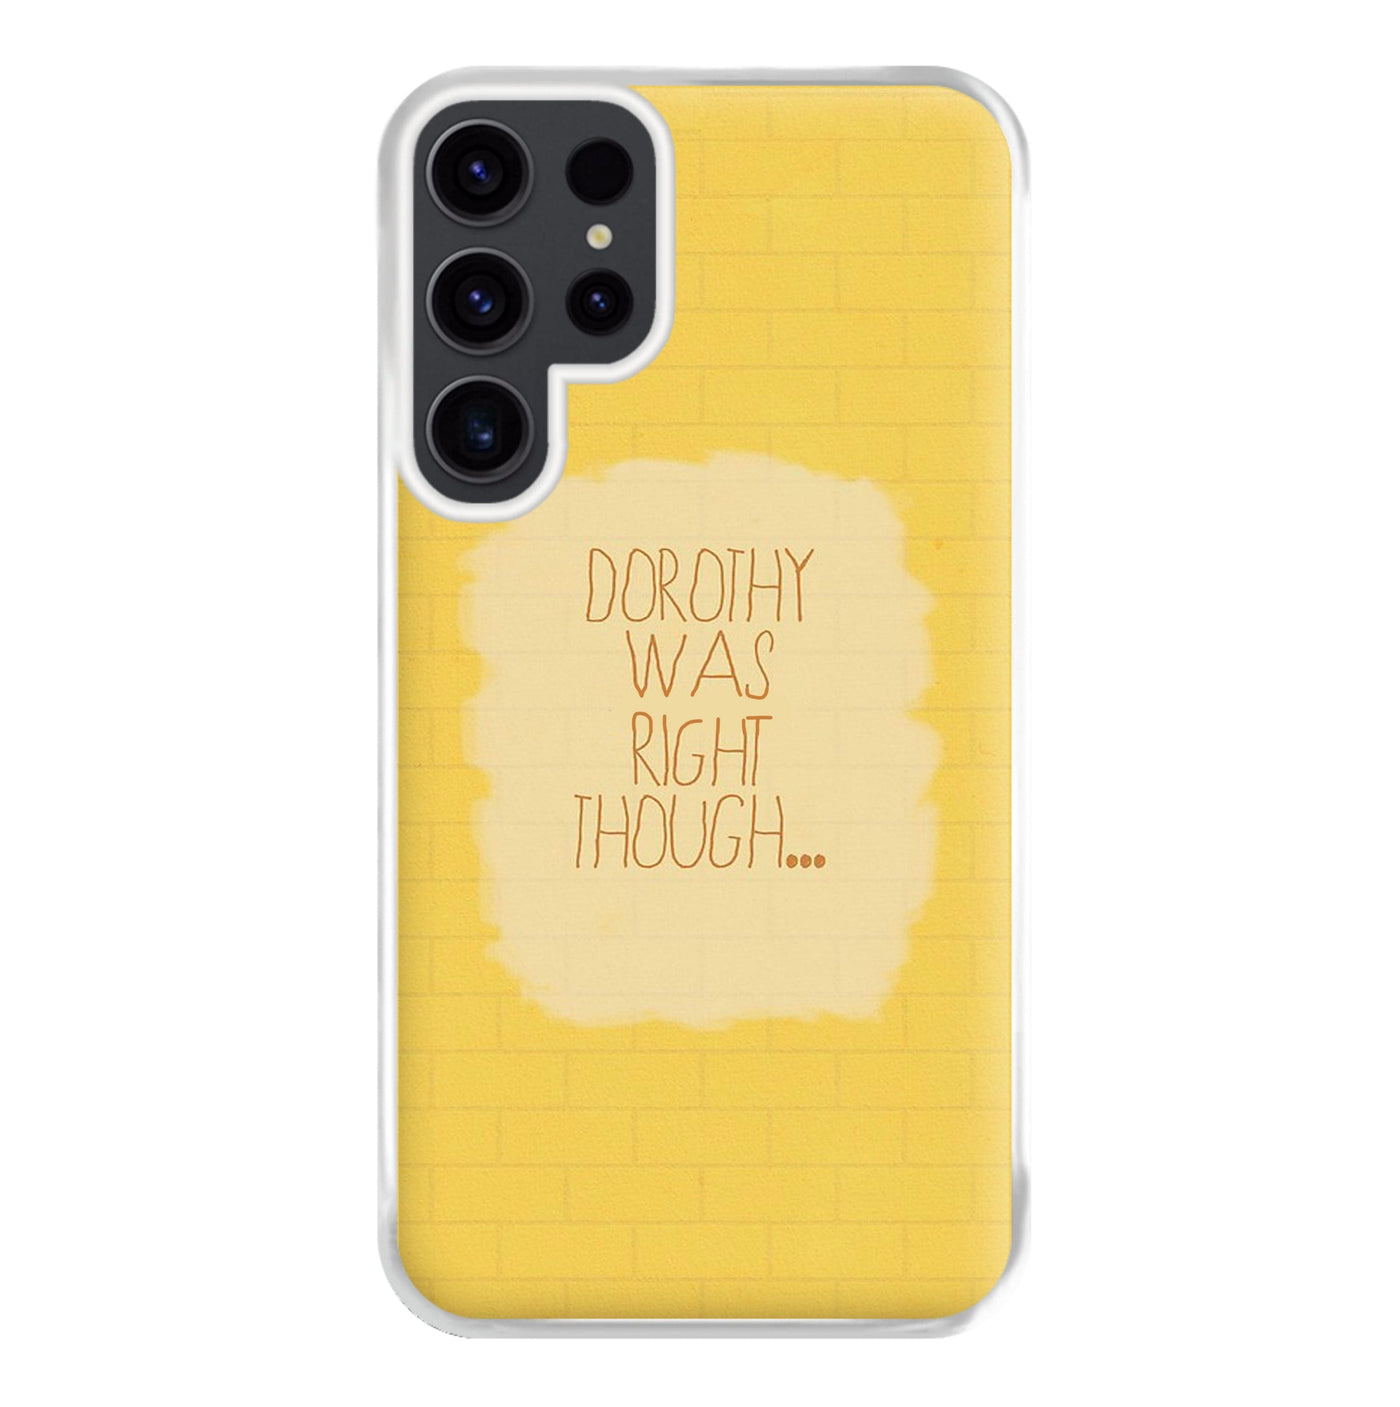 But Dorothy Was Right Though - Arctic Monkeys Phone Case